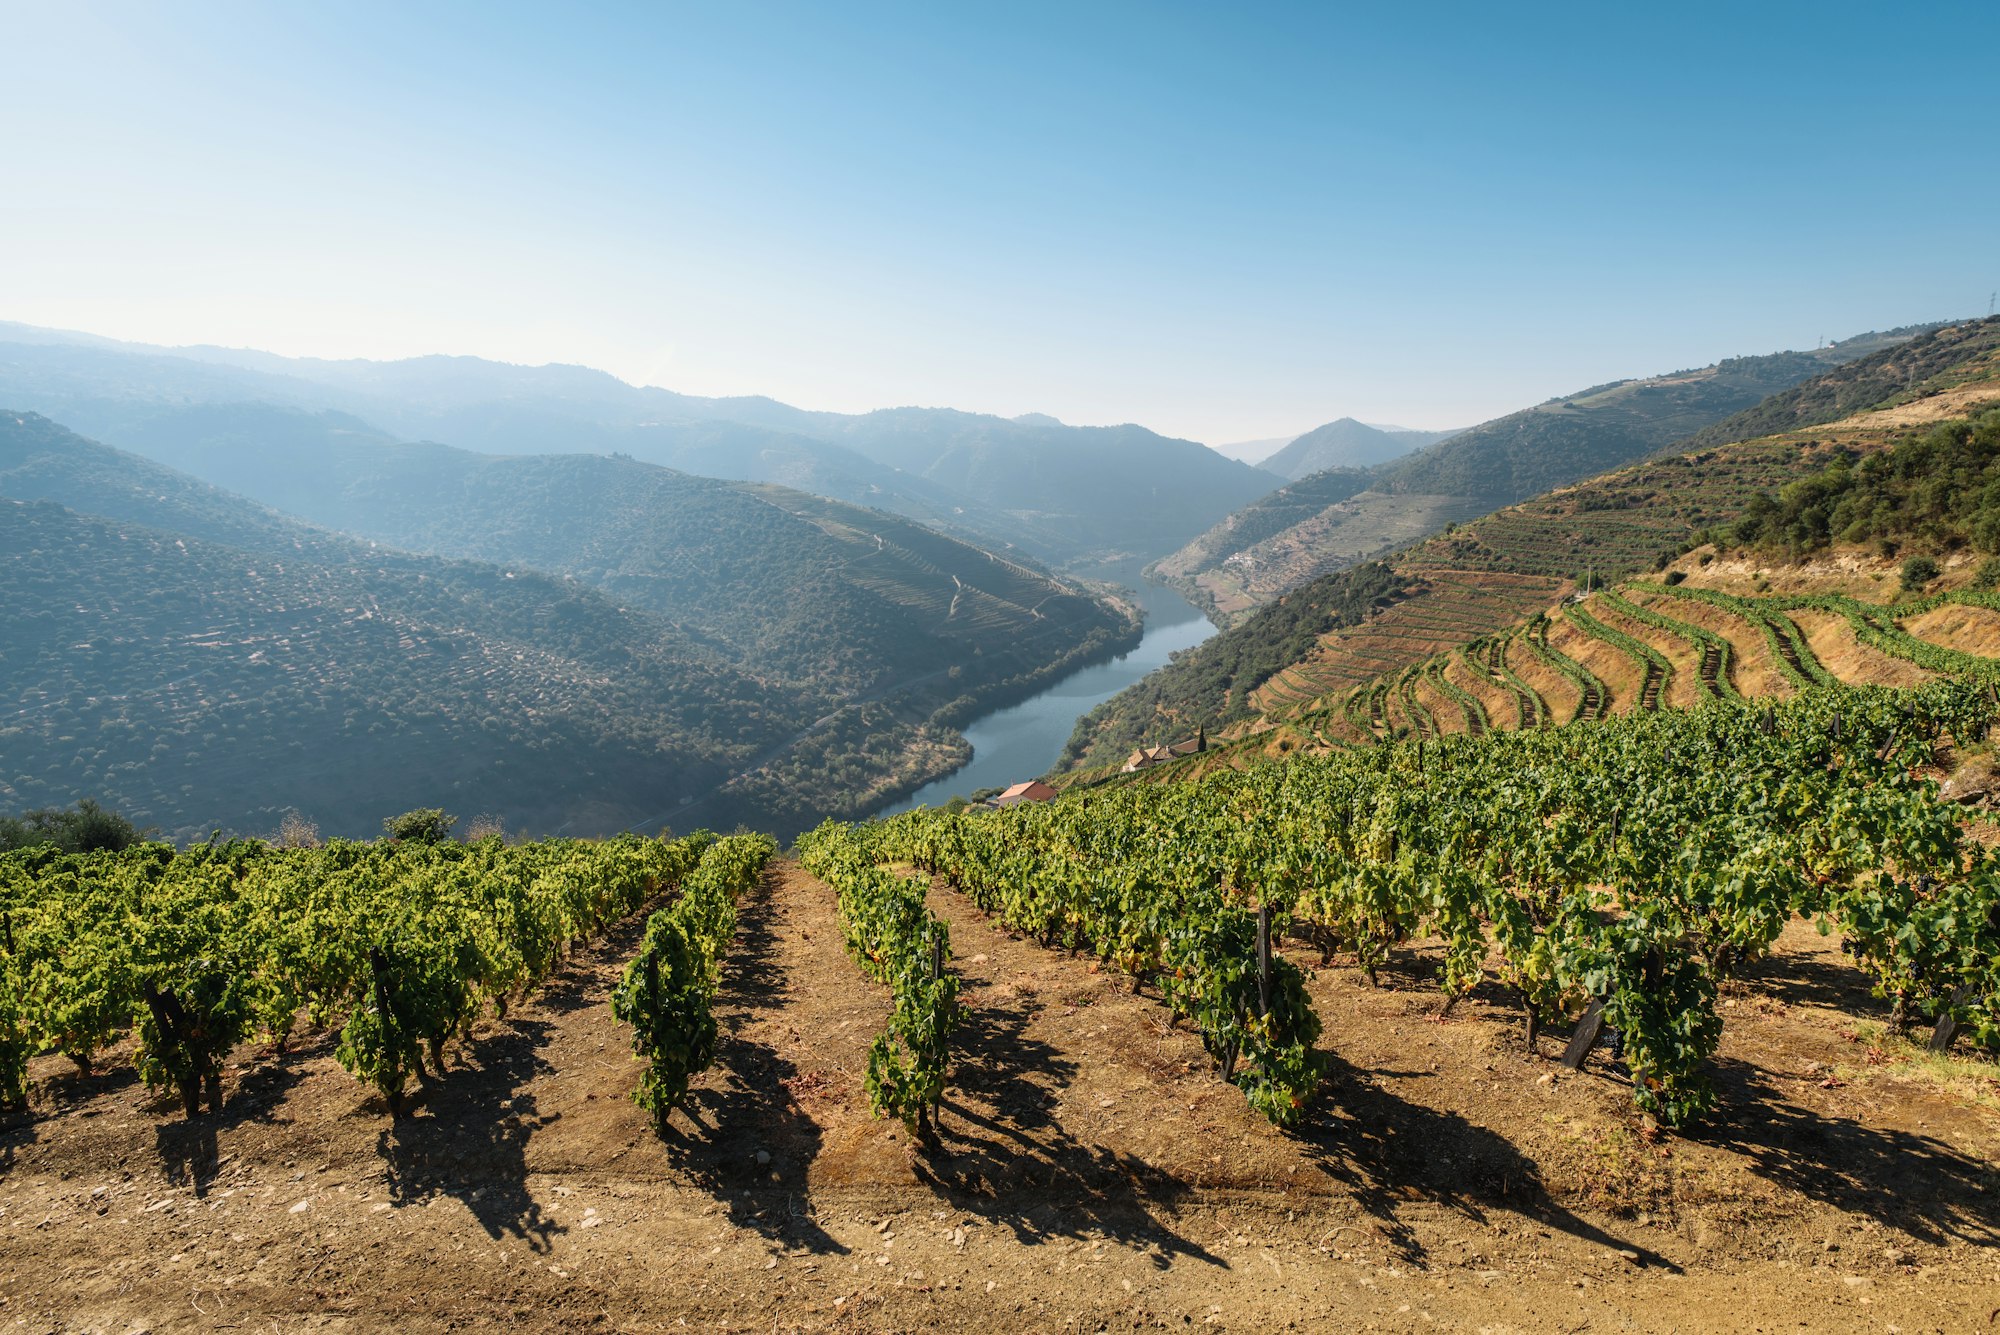 The vineyards in Douro Valley, Portugal. The UNESCO World Heritage region where the Porto Wine is produced.